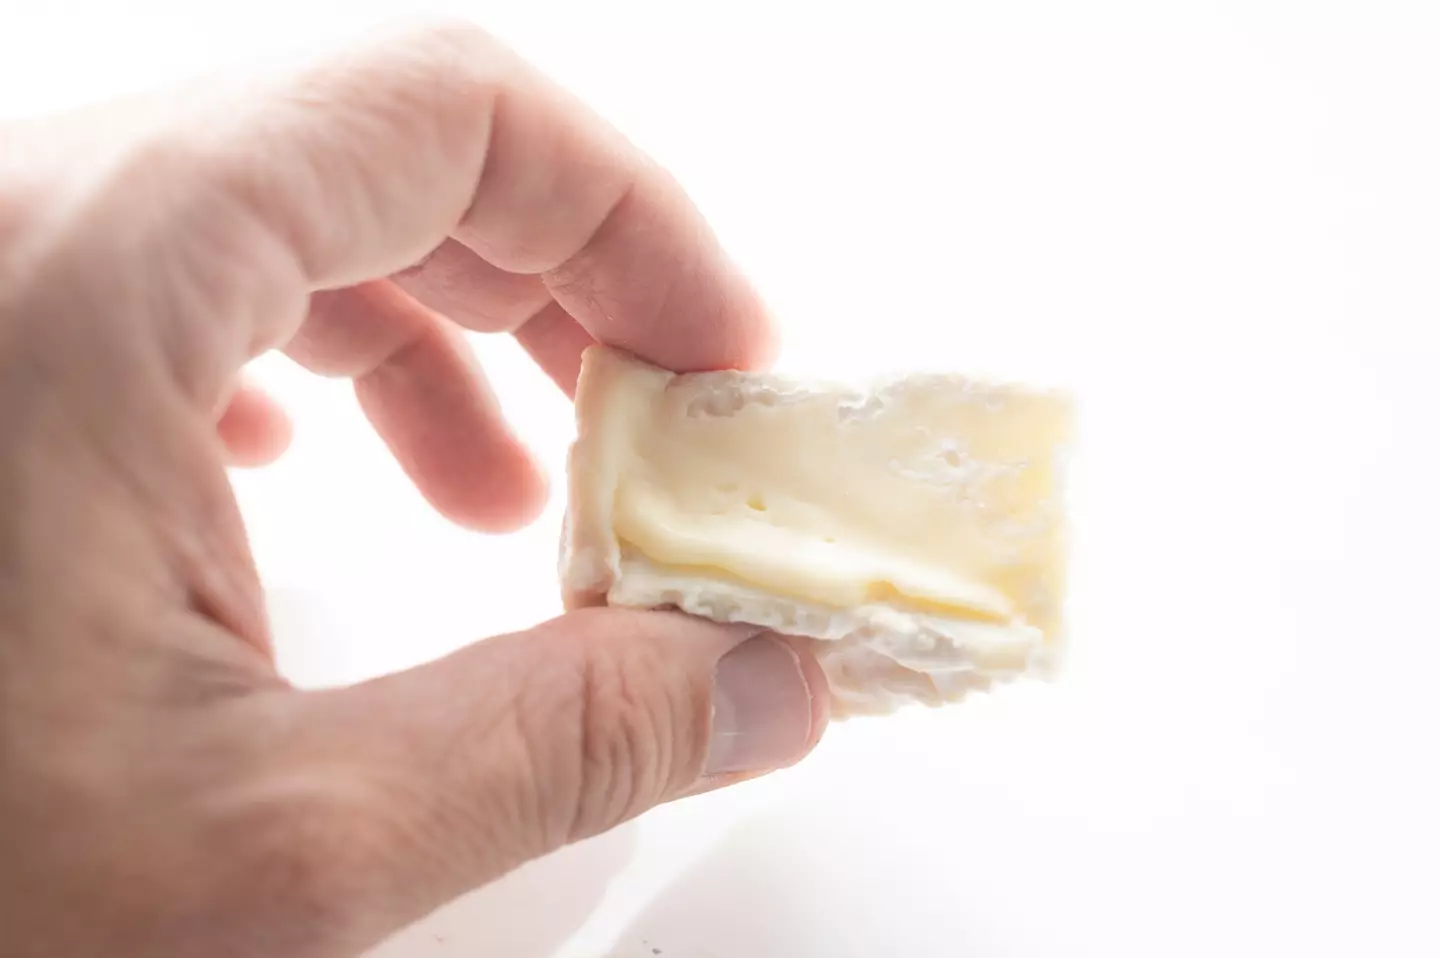 Don't stick MDMA in cheese, it's still very illegal and a waste of good brie.